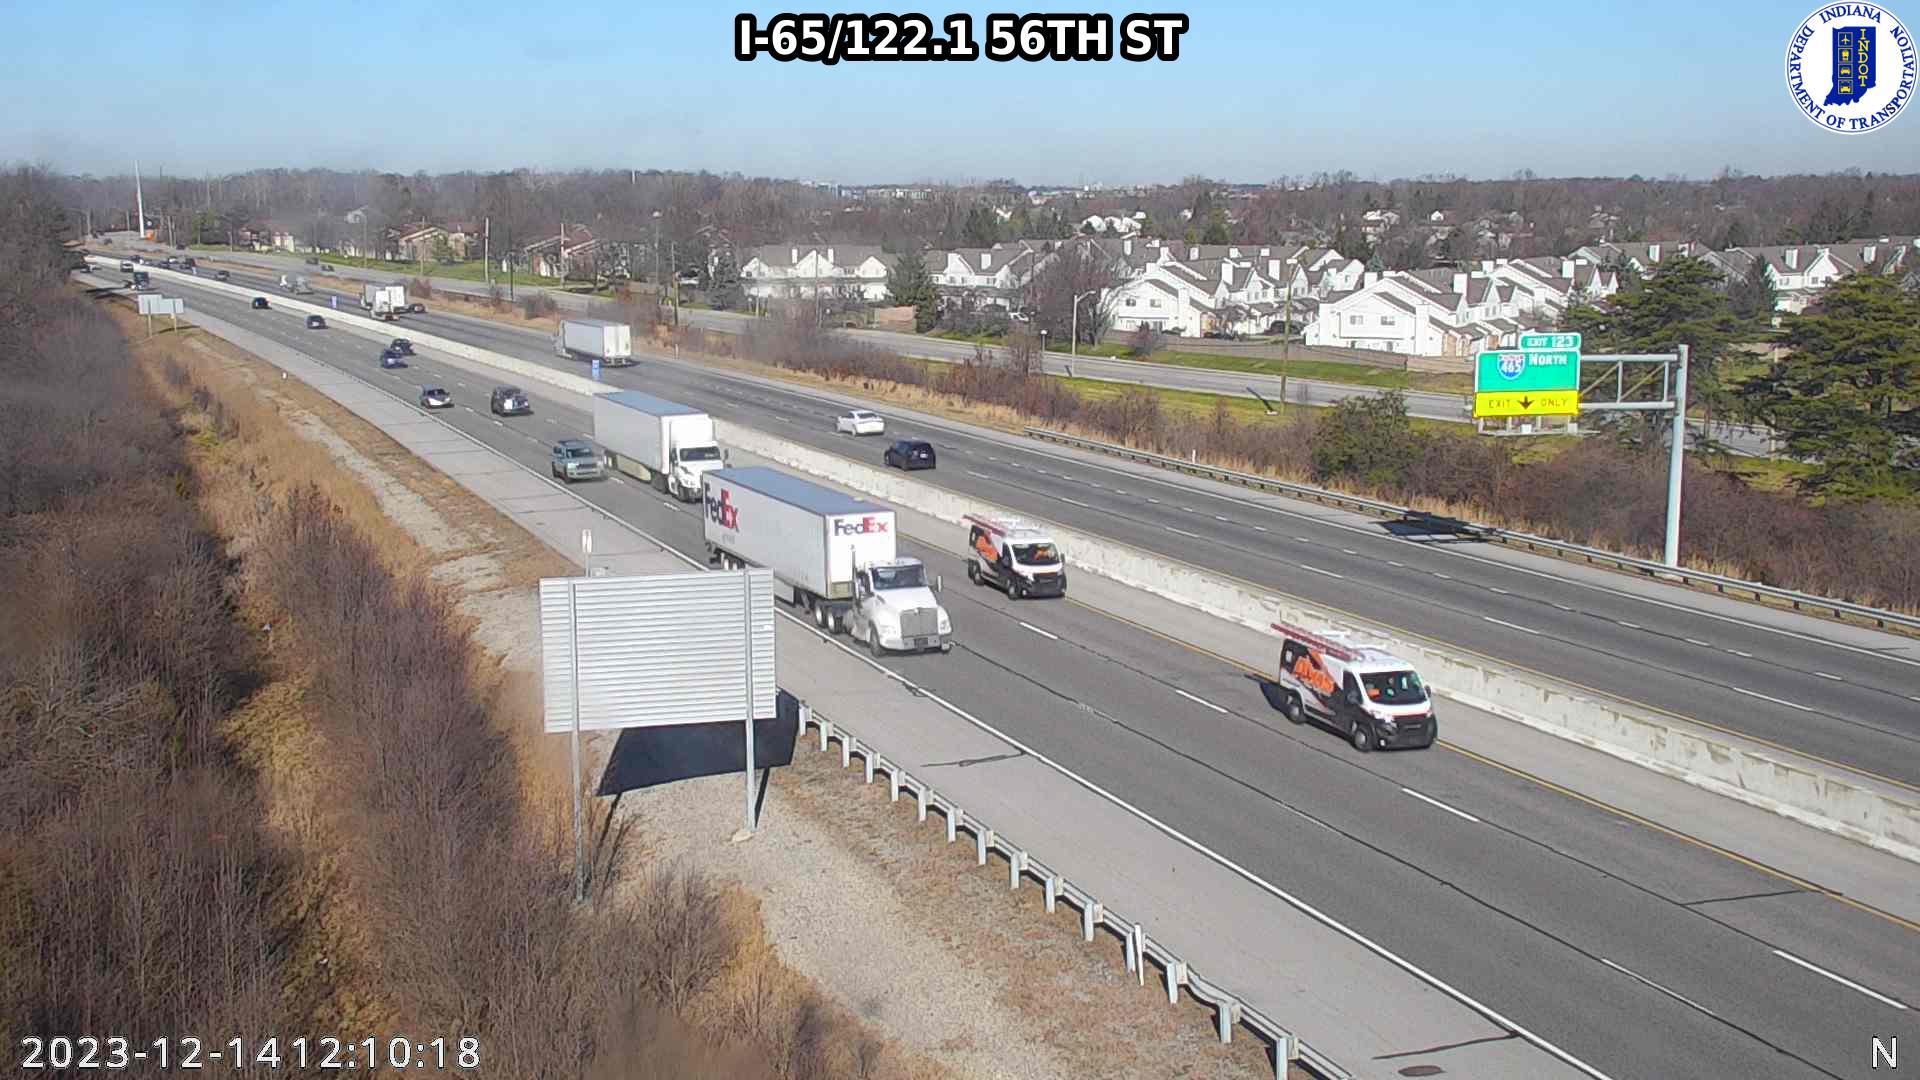 Traffic Cam Indianapolis: I-65: I-65/122.1 56TH ST Player